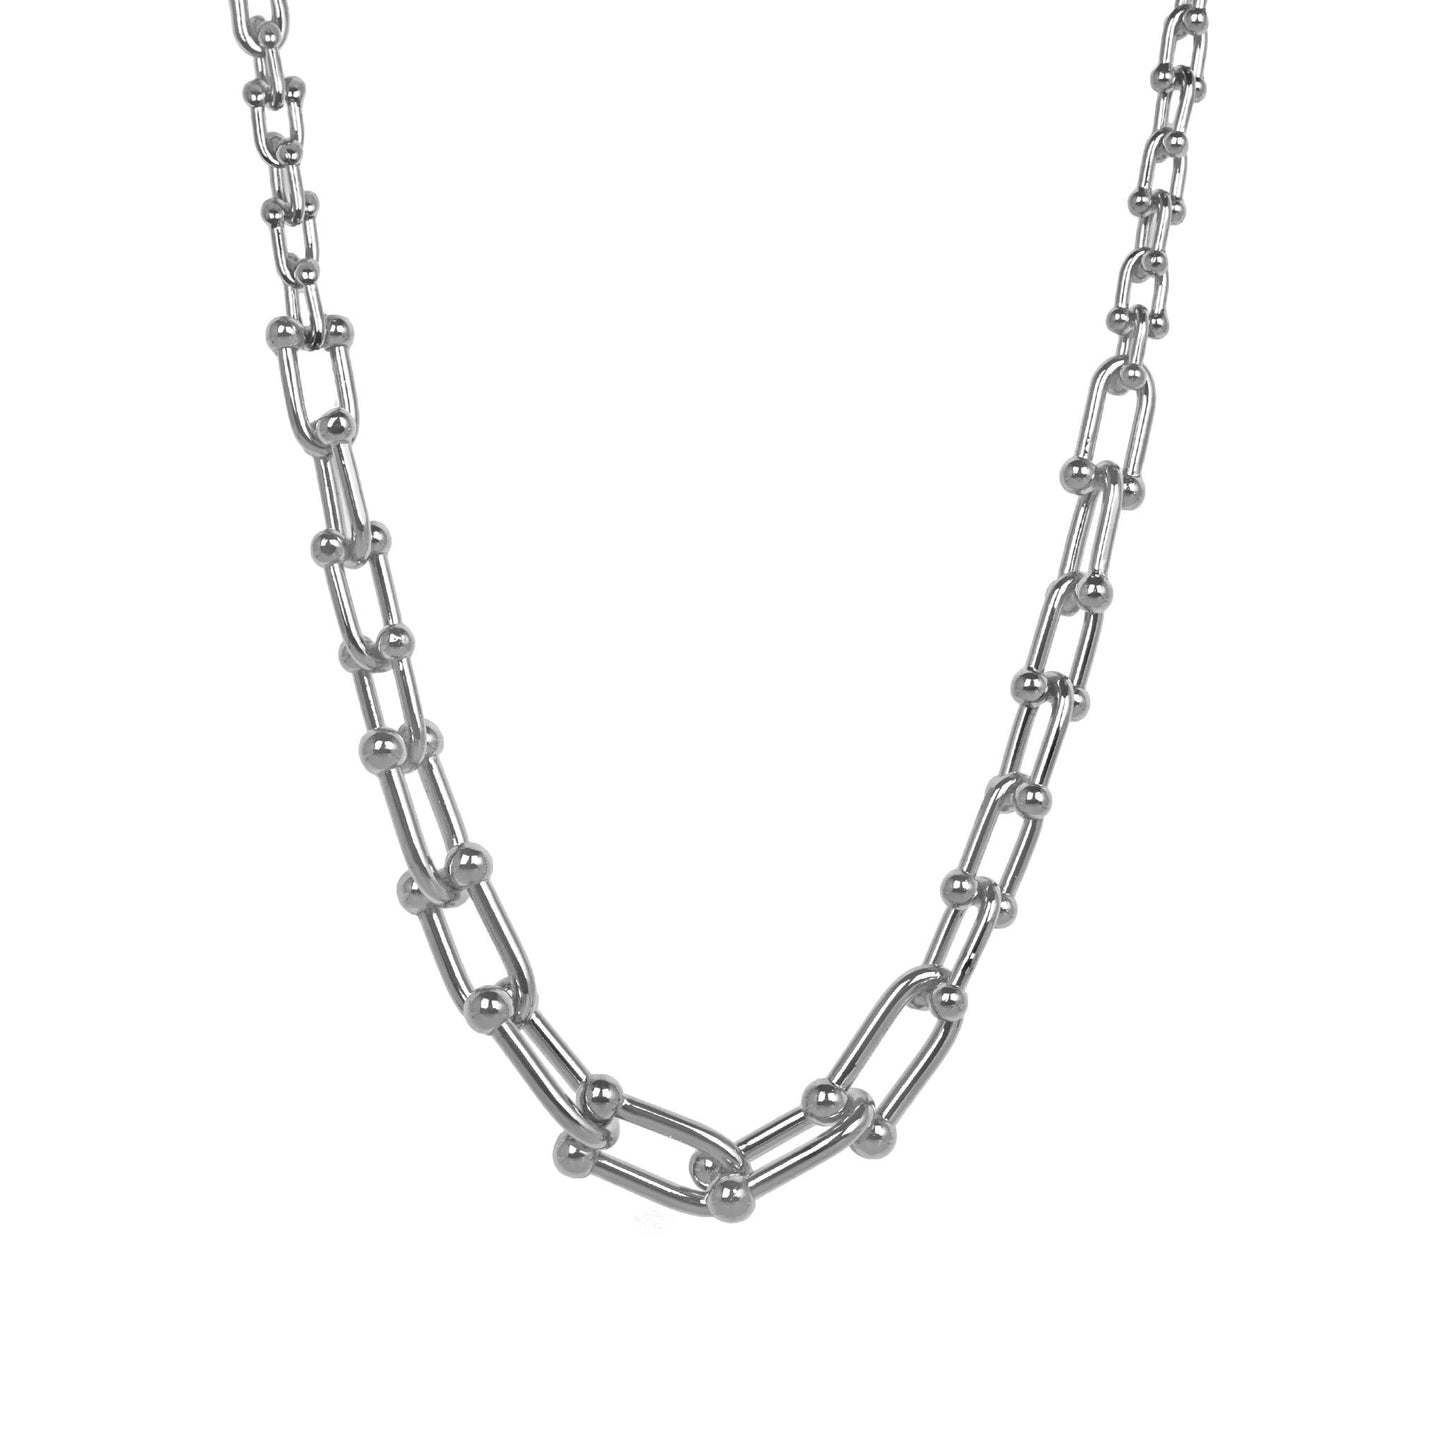 Shirley necklace